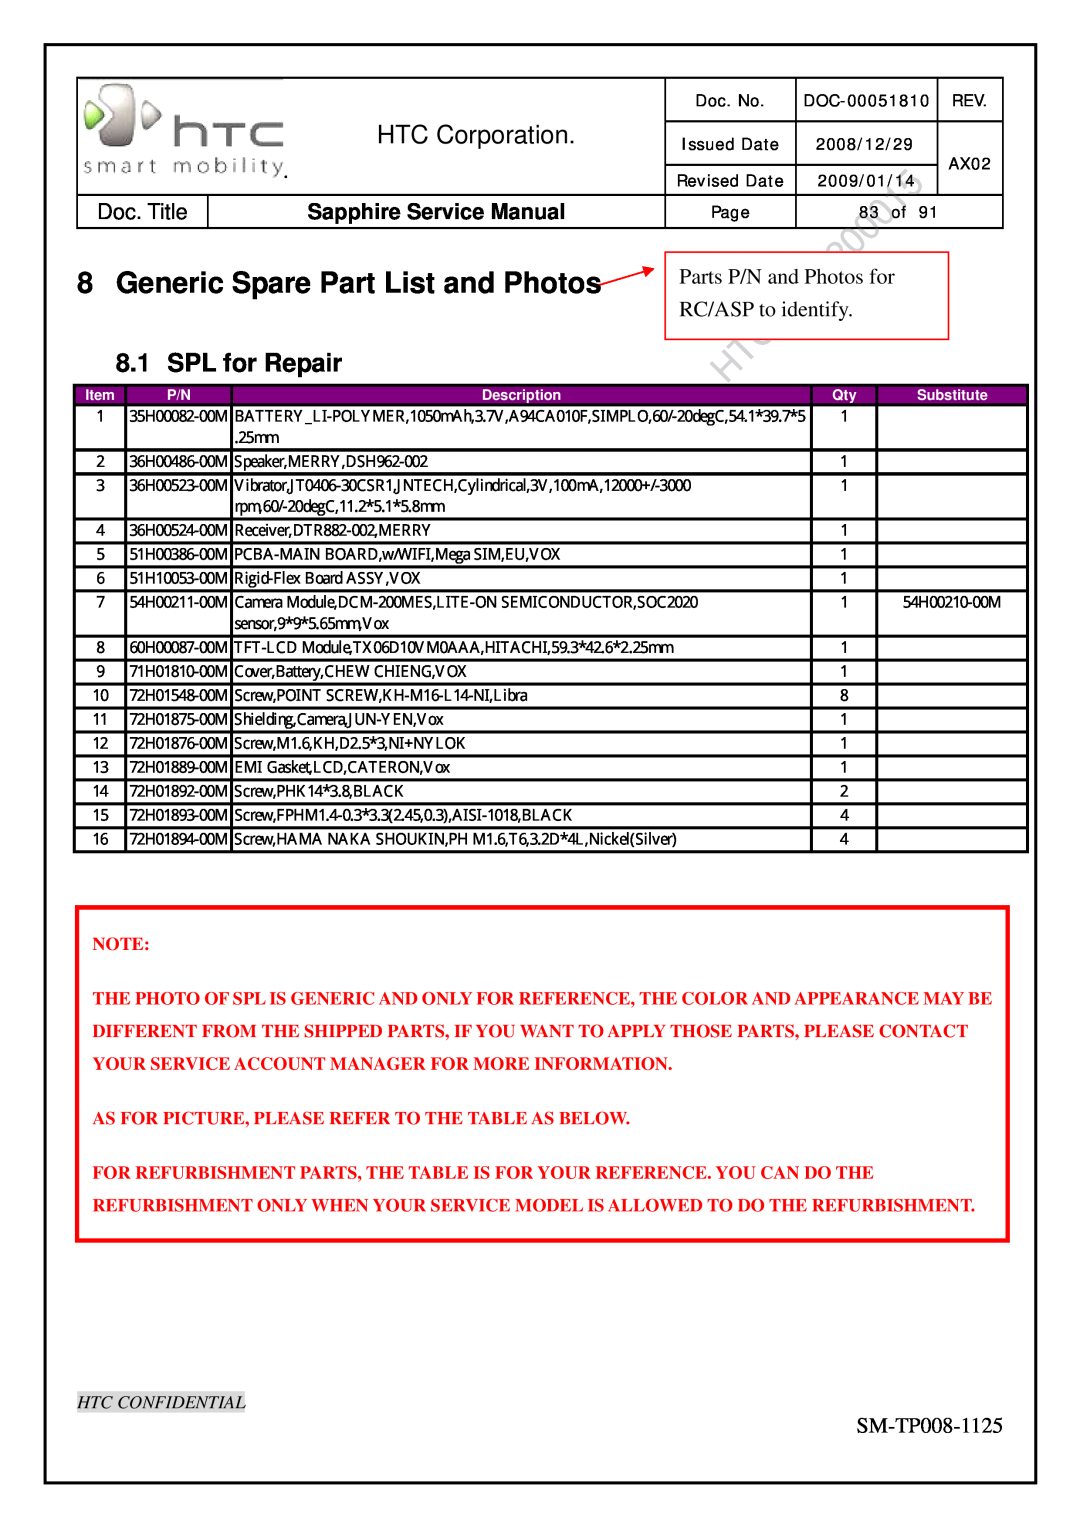 HTC SM-TP008-1125 Generic Spare Part List and Photos, SPL for Repair, HTC Corporation, Sapphire Service Manual 